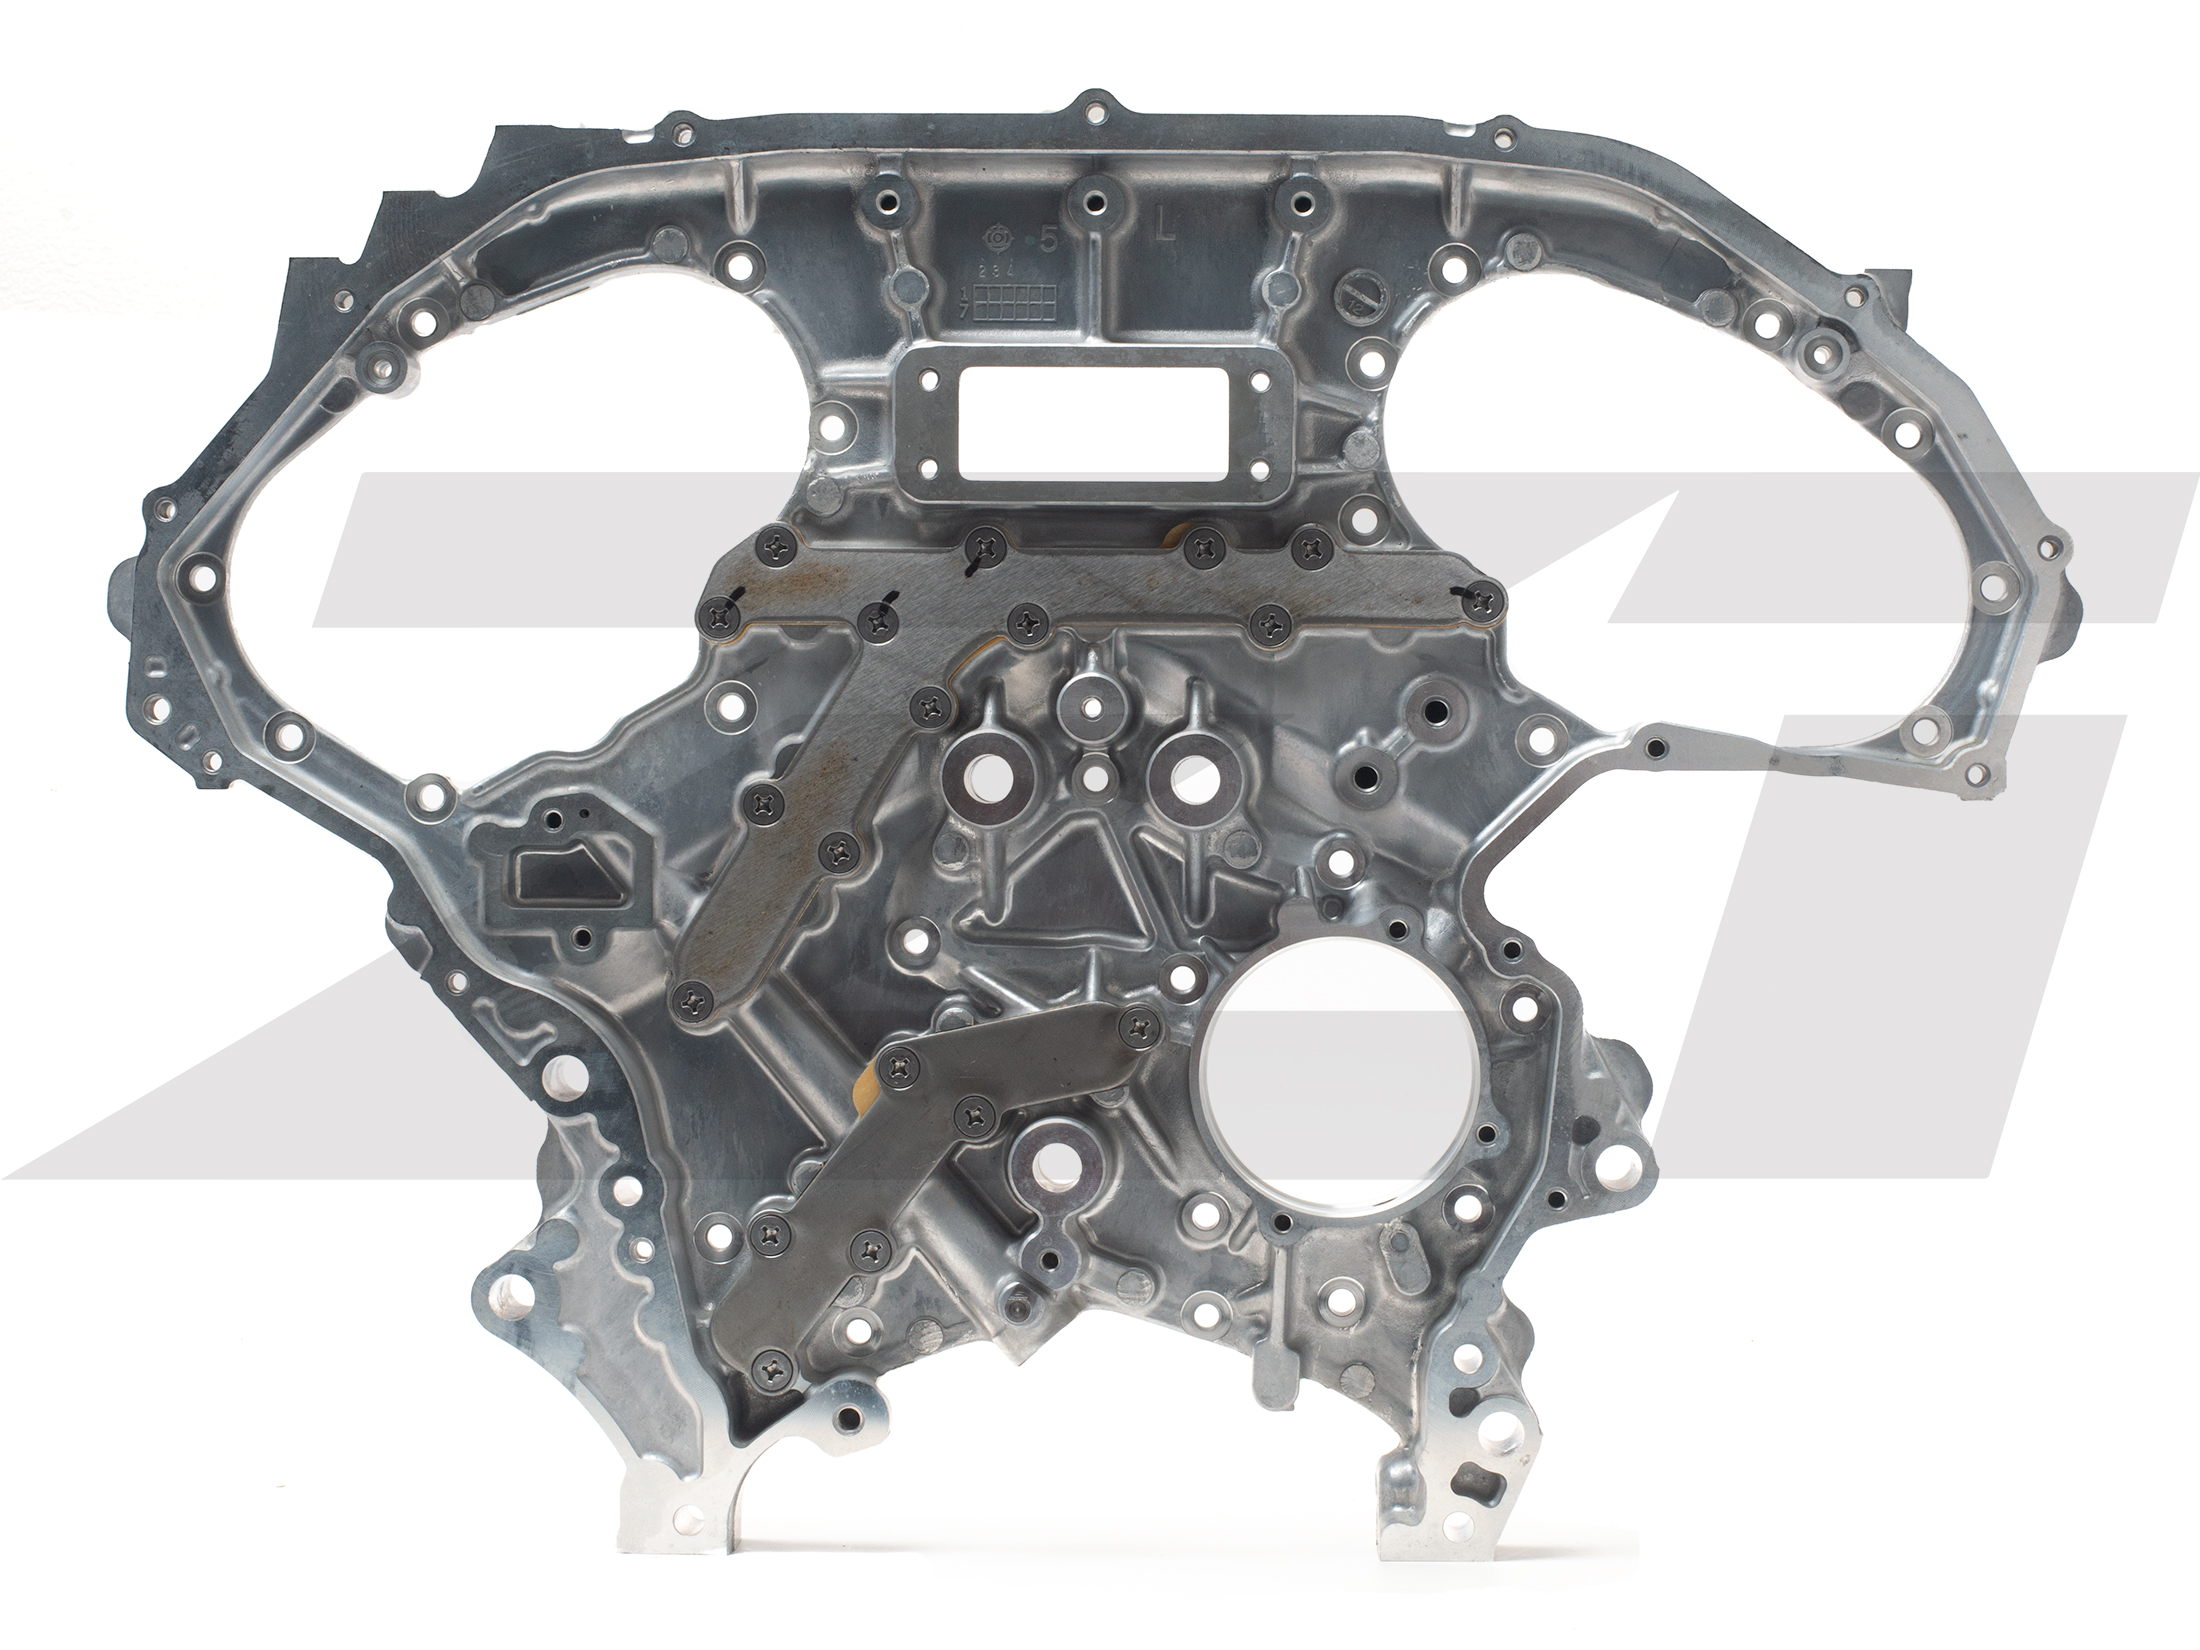 OEM '05+ VQ Rear Timing Chain Cover